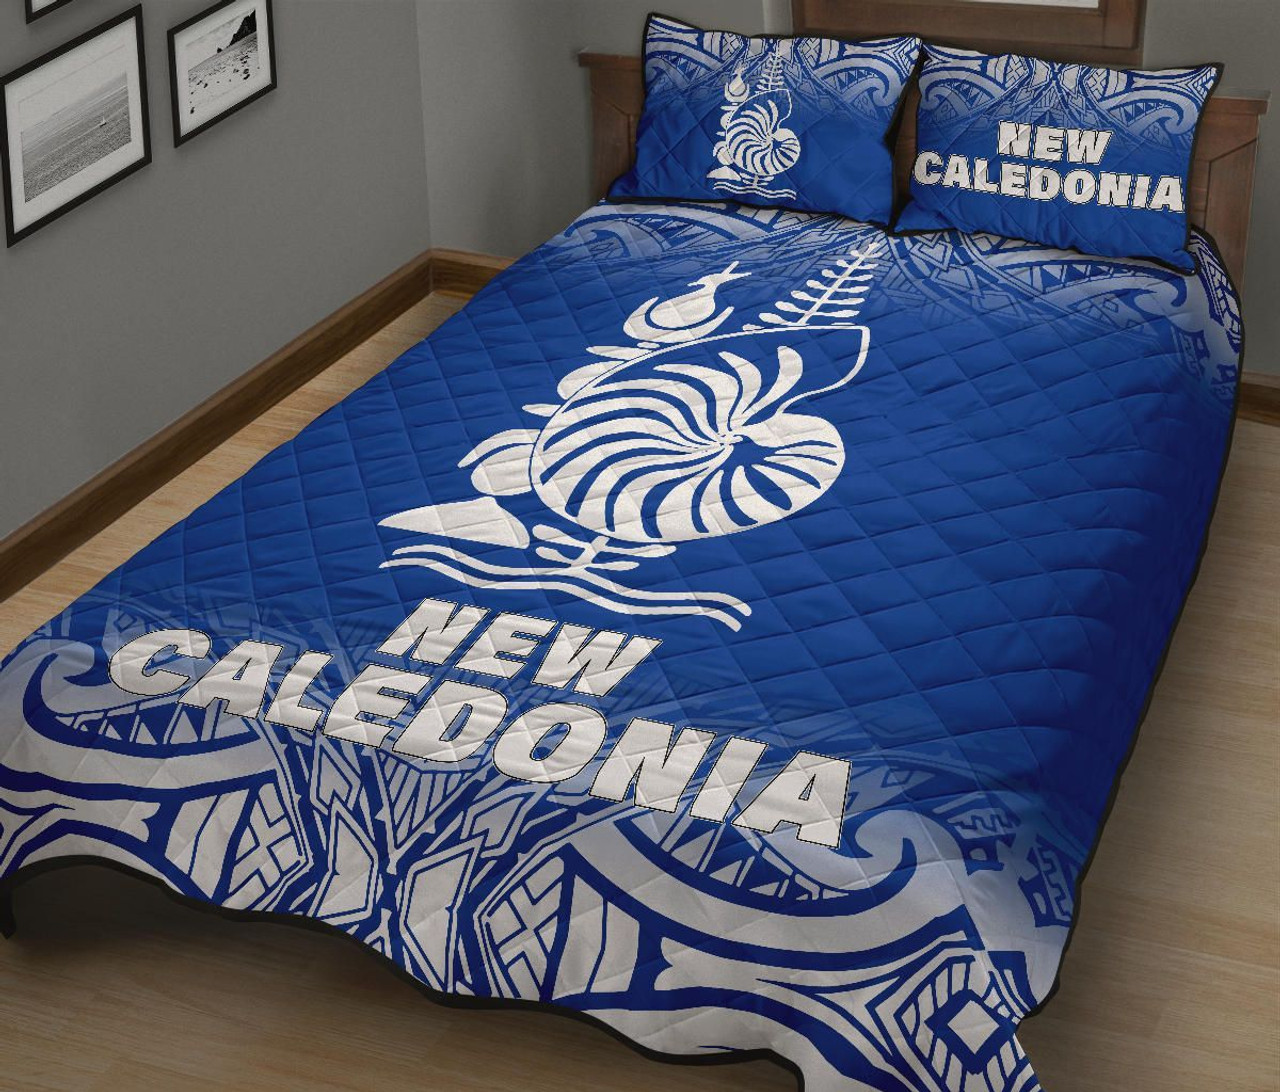 New Caledonia Quilt Bed Set - New Caledonia Coat Of Arms Polynesian Tattoo Blue Fog Style 3